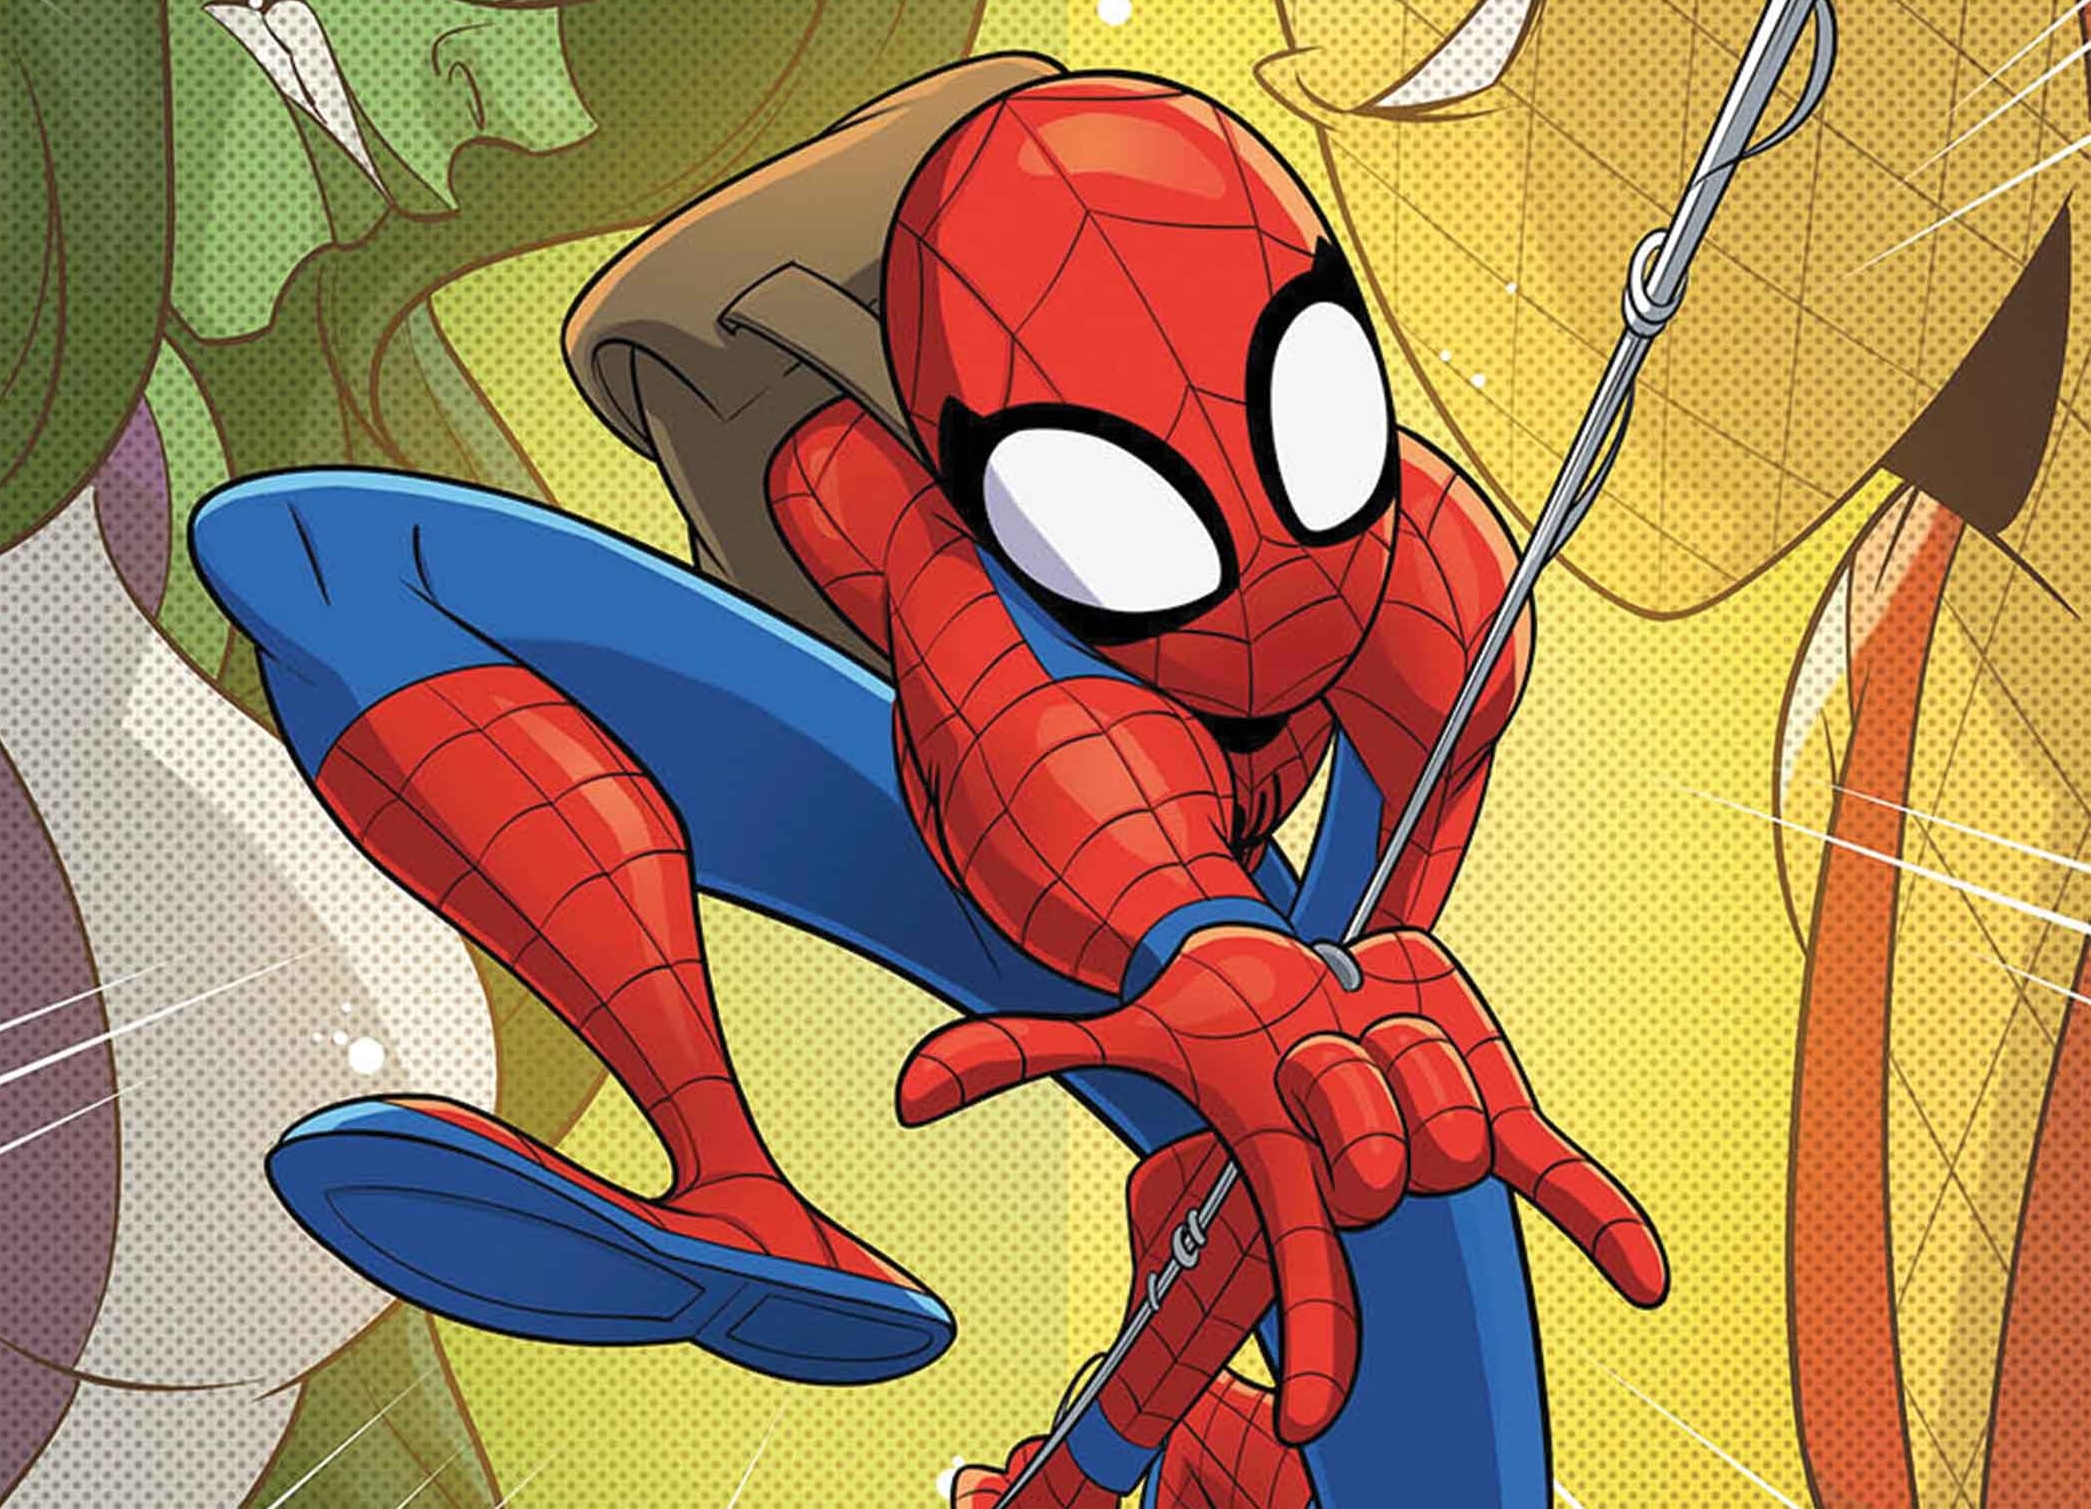 Marvel announces two new all-ages Spider-Man series